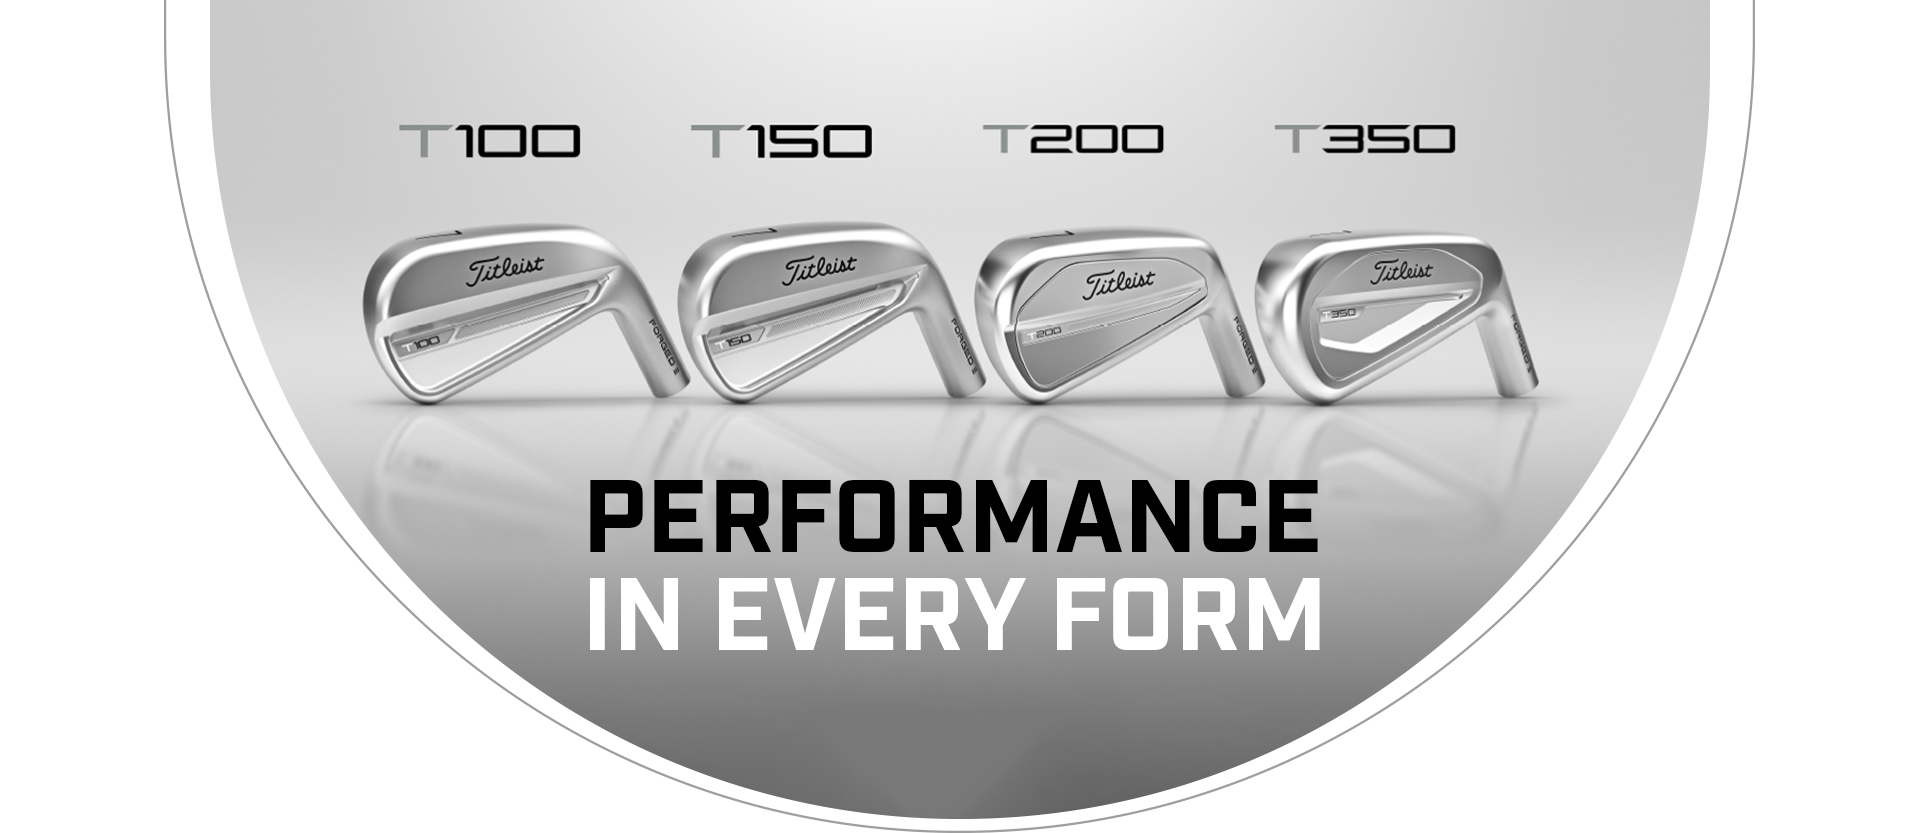 PERFORMANCE IN EVERY FORM